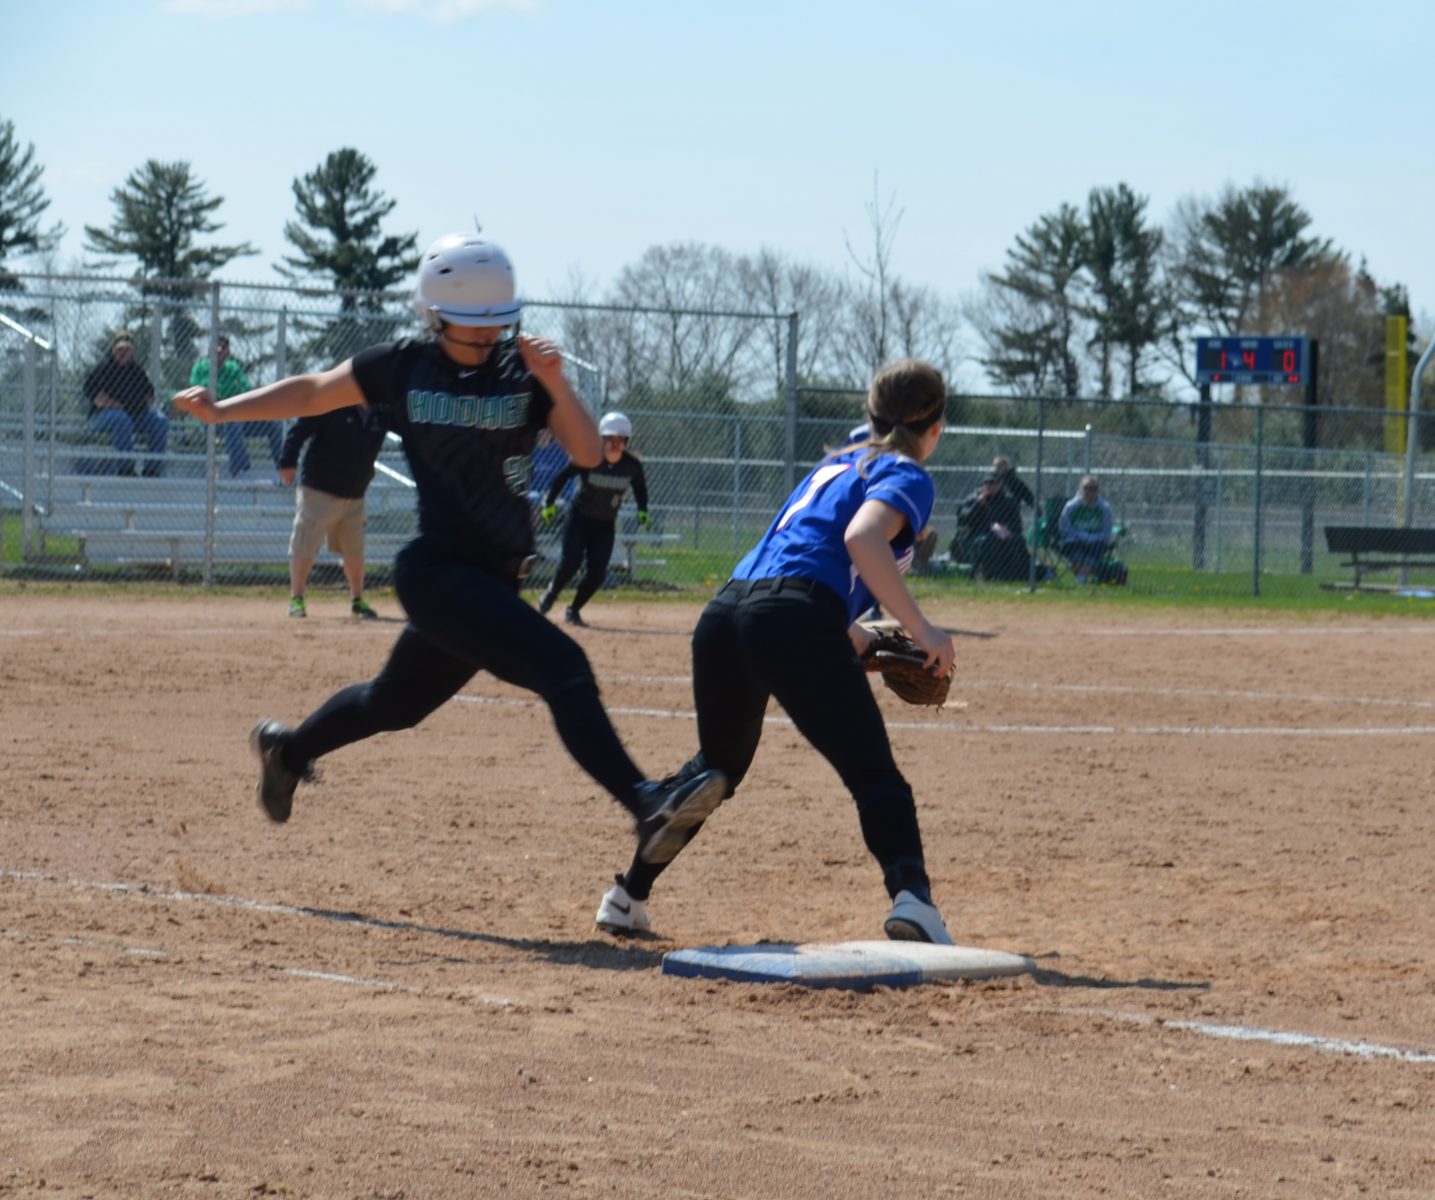 Bluejay fast-pitchers win some, lose some